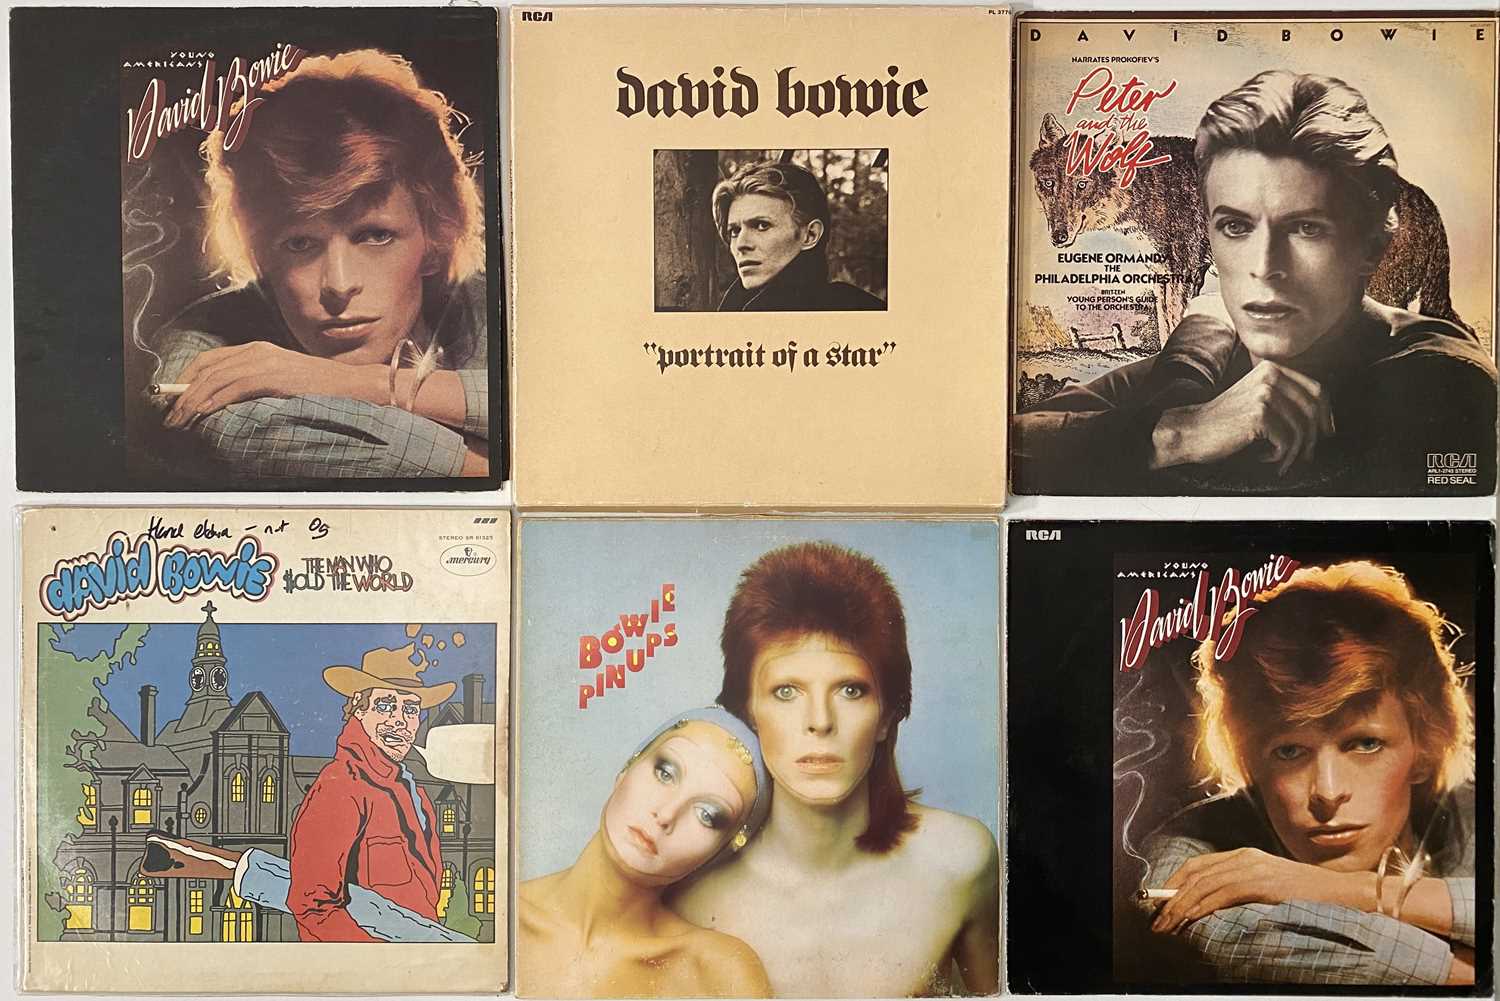 DAVID BOWIE - OVERSEAS PRESSING LPs - Image 2 of 3